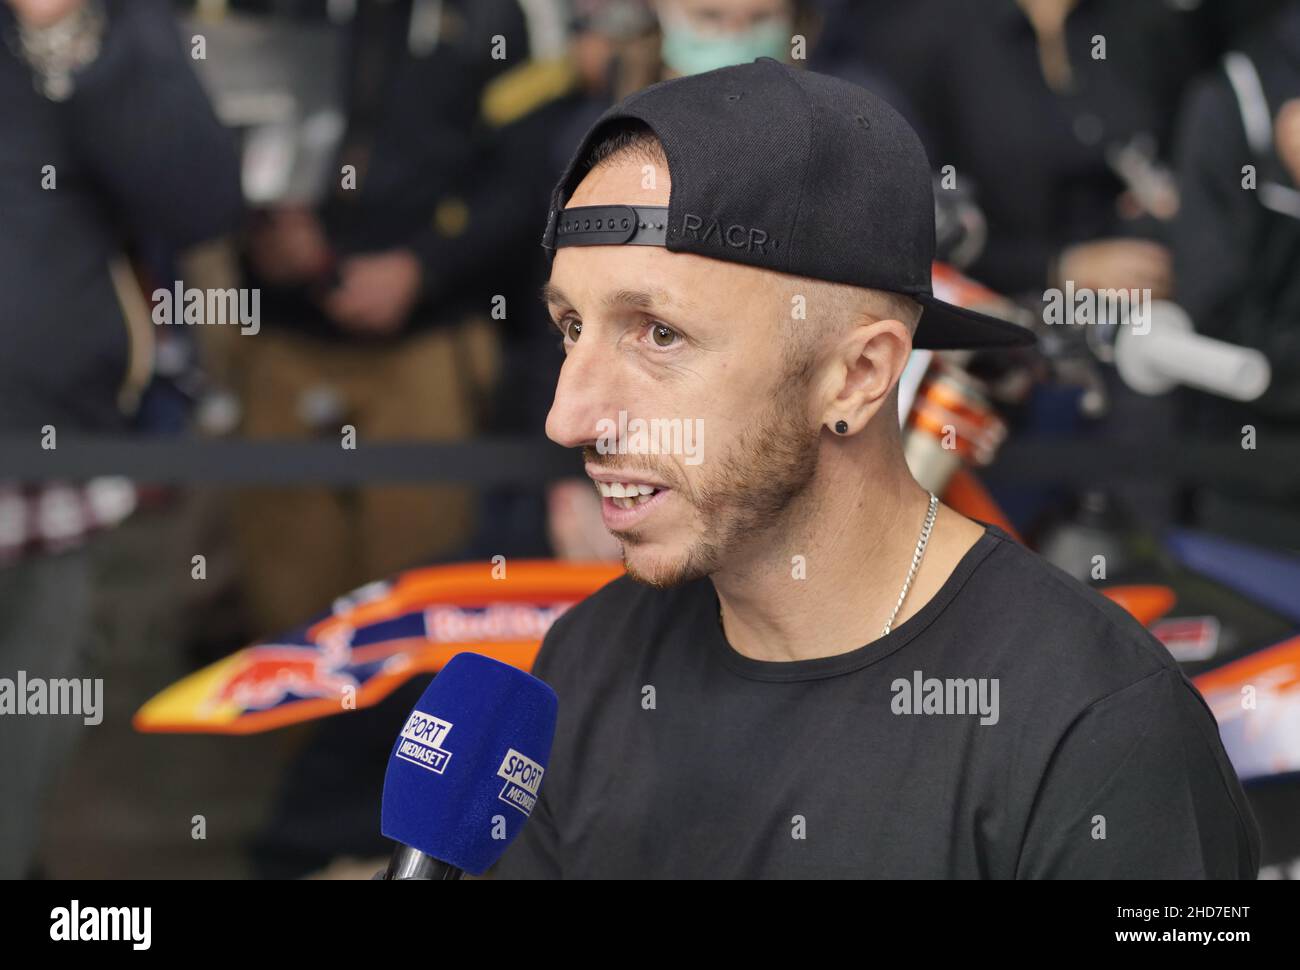 Nine-time motocross world champion Antonio Cairoli meets the fans and signs autographs at Eicma 2021 Stock Photo